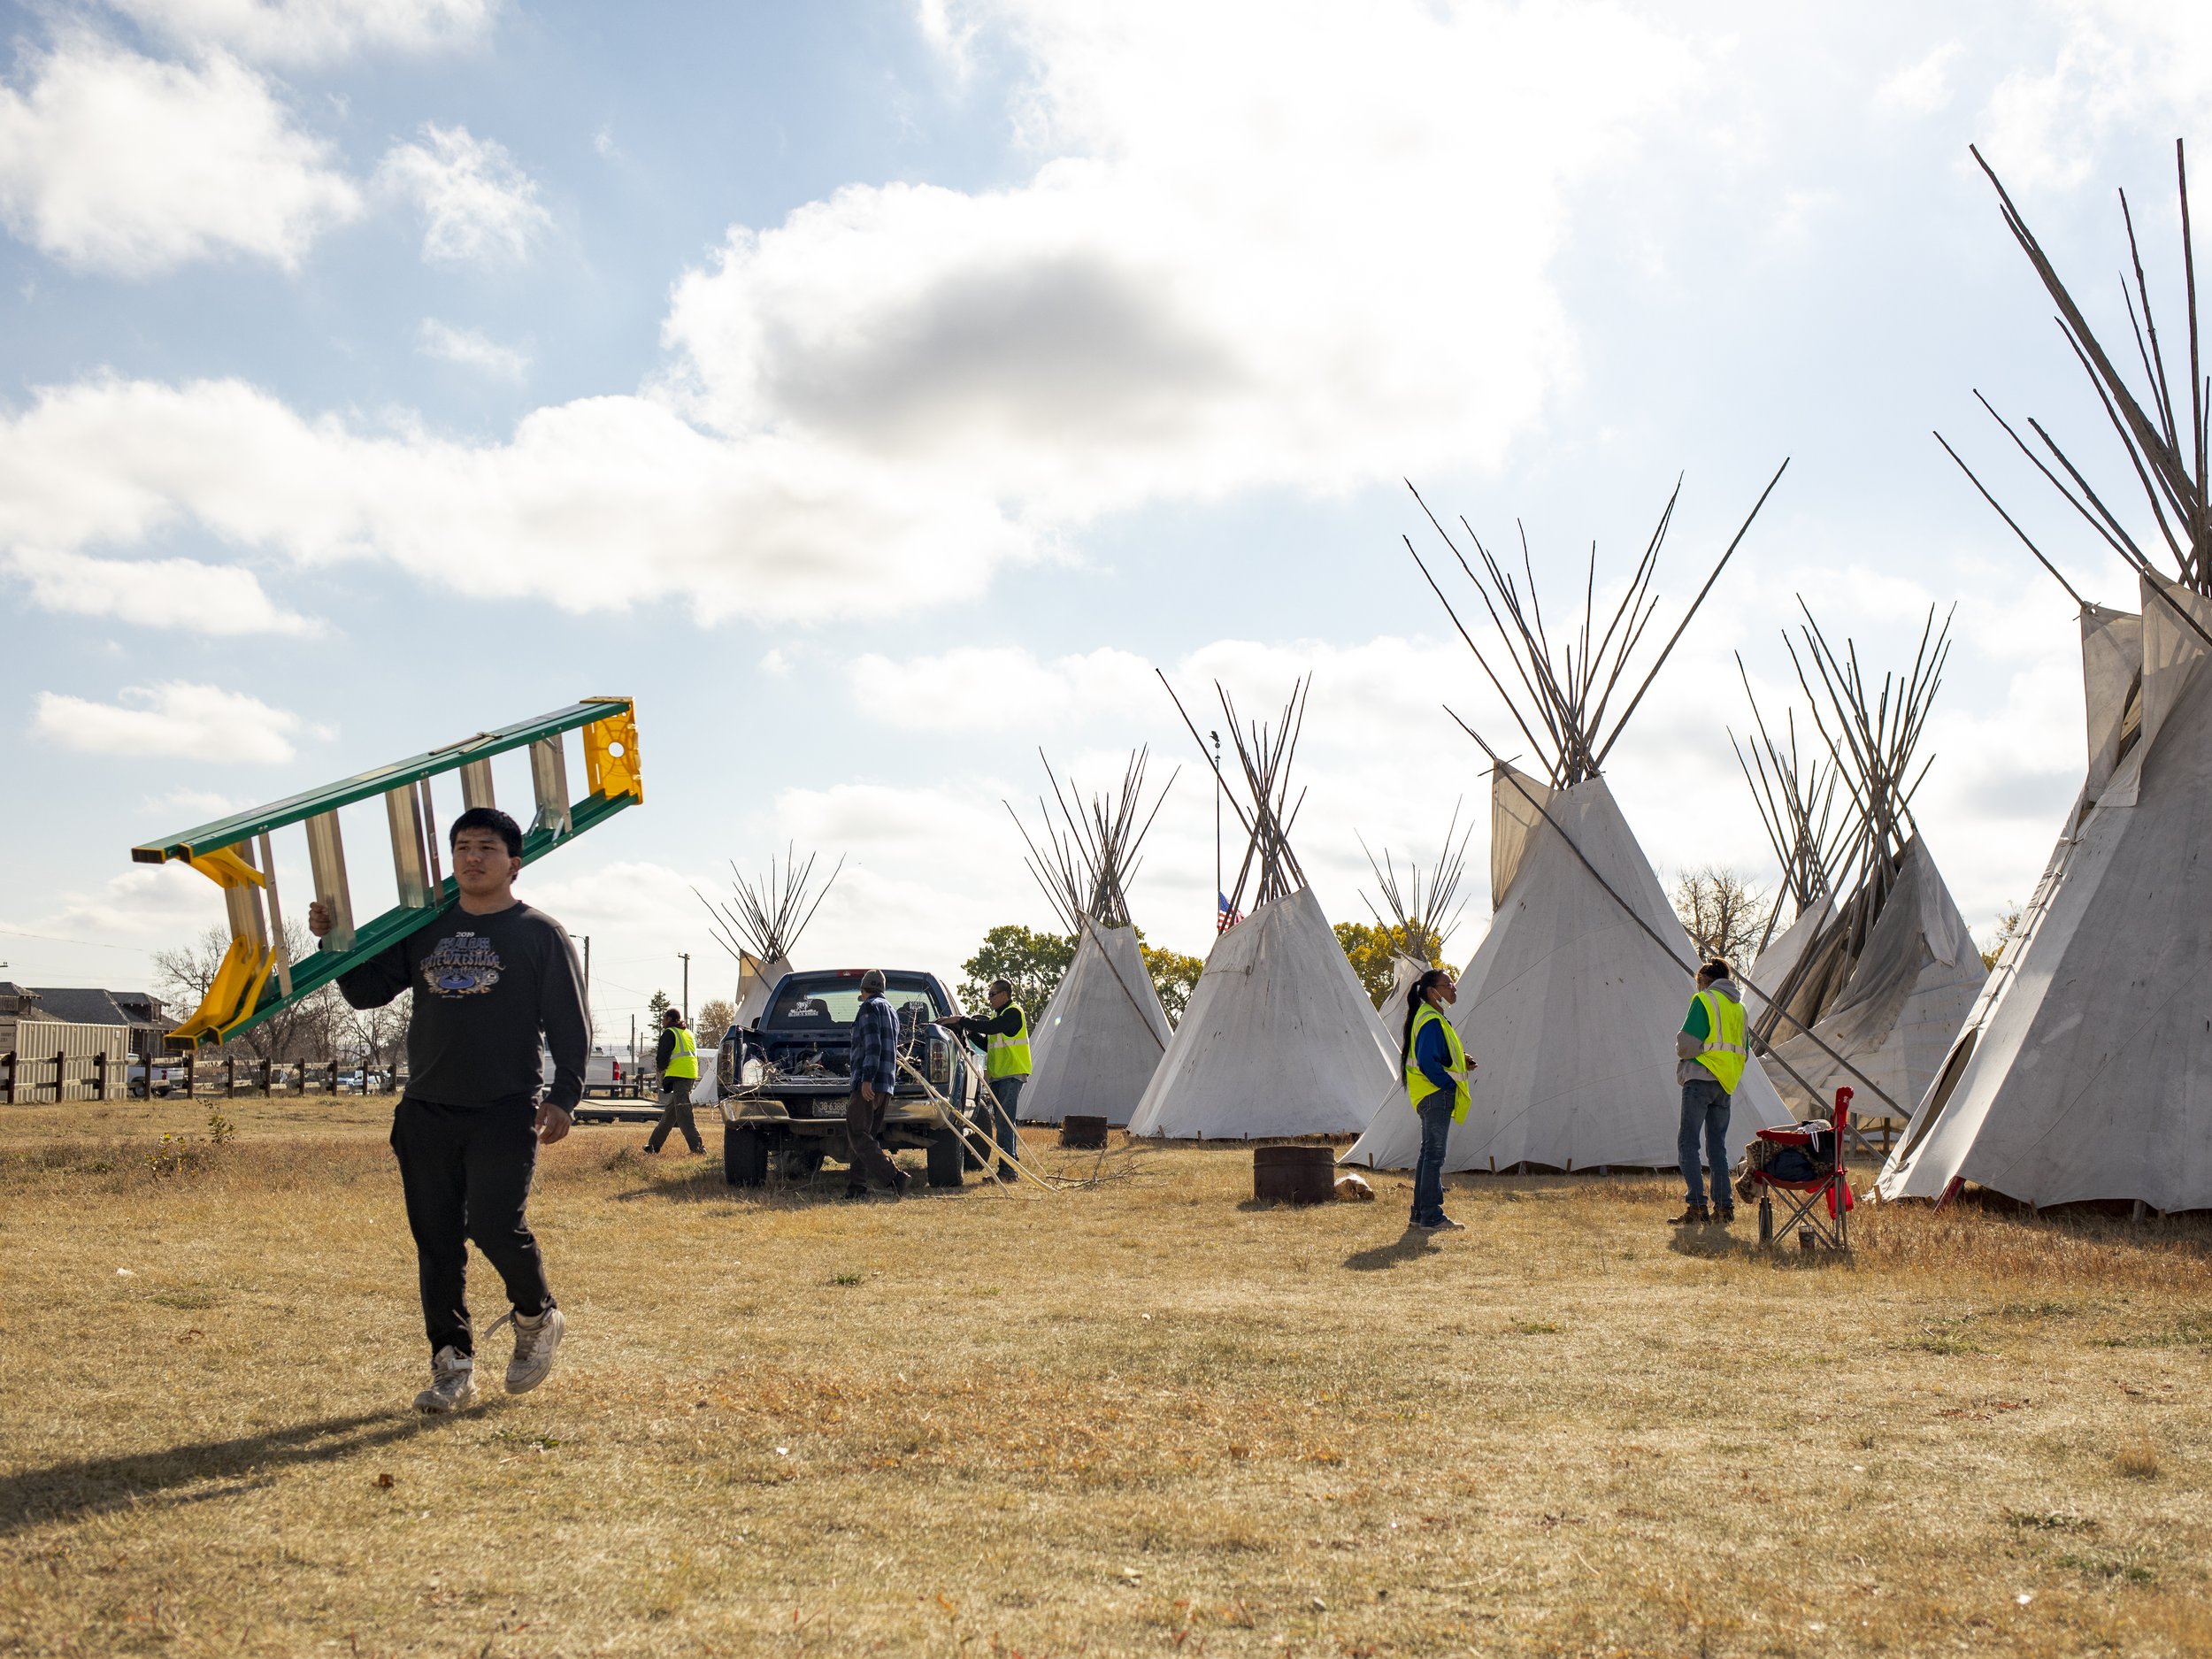  Members of the Blackfeet Nation erected tepees to pay tribute to Chief Old Person during&nbsp;a four-day period of mourning. 